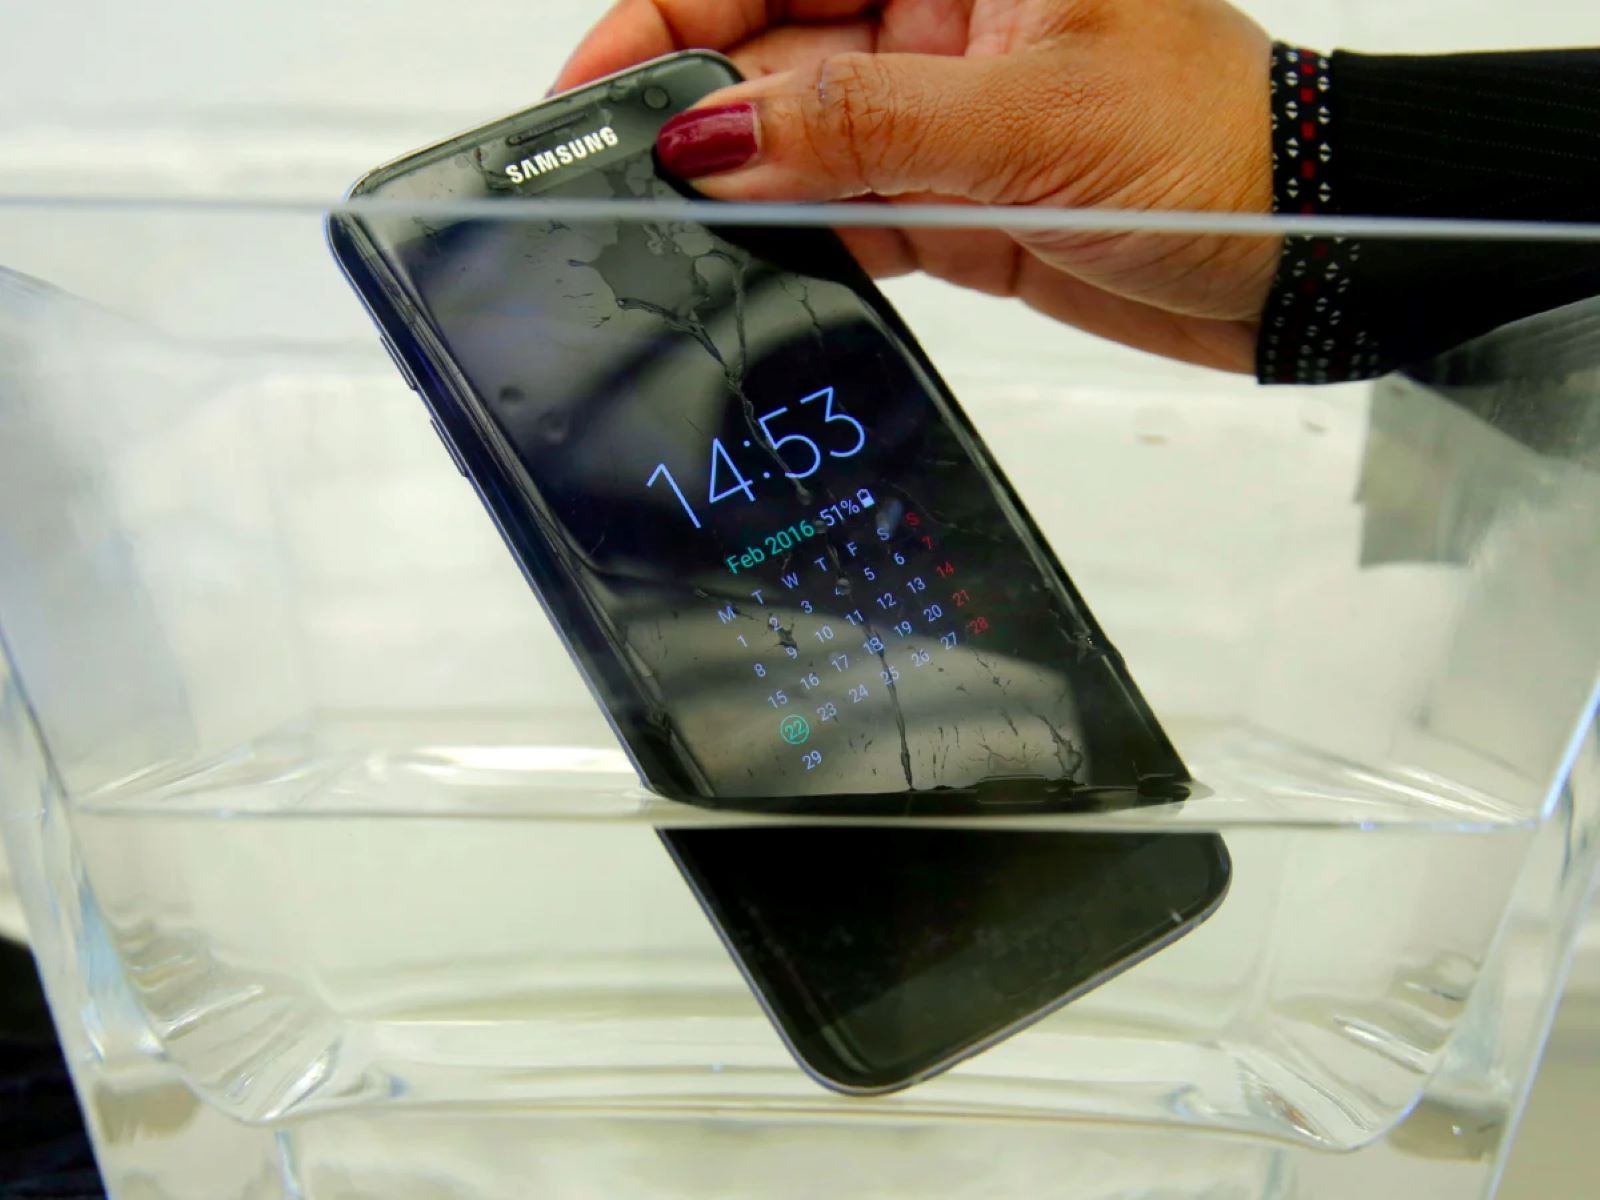 Transform Your Device: Making A Phone Waterproof